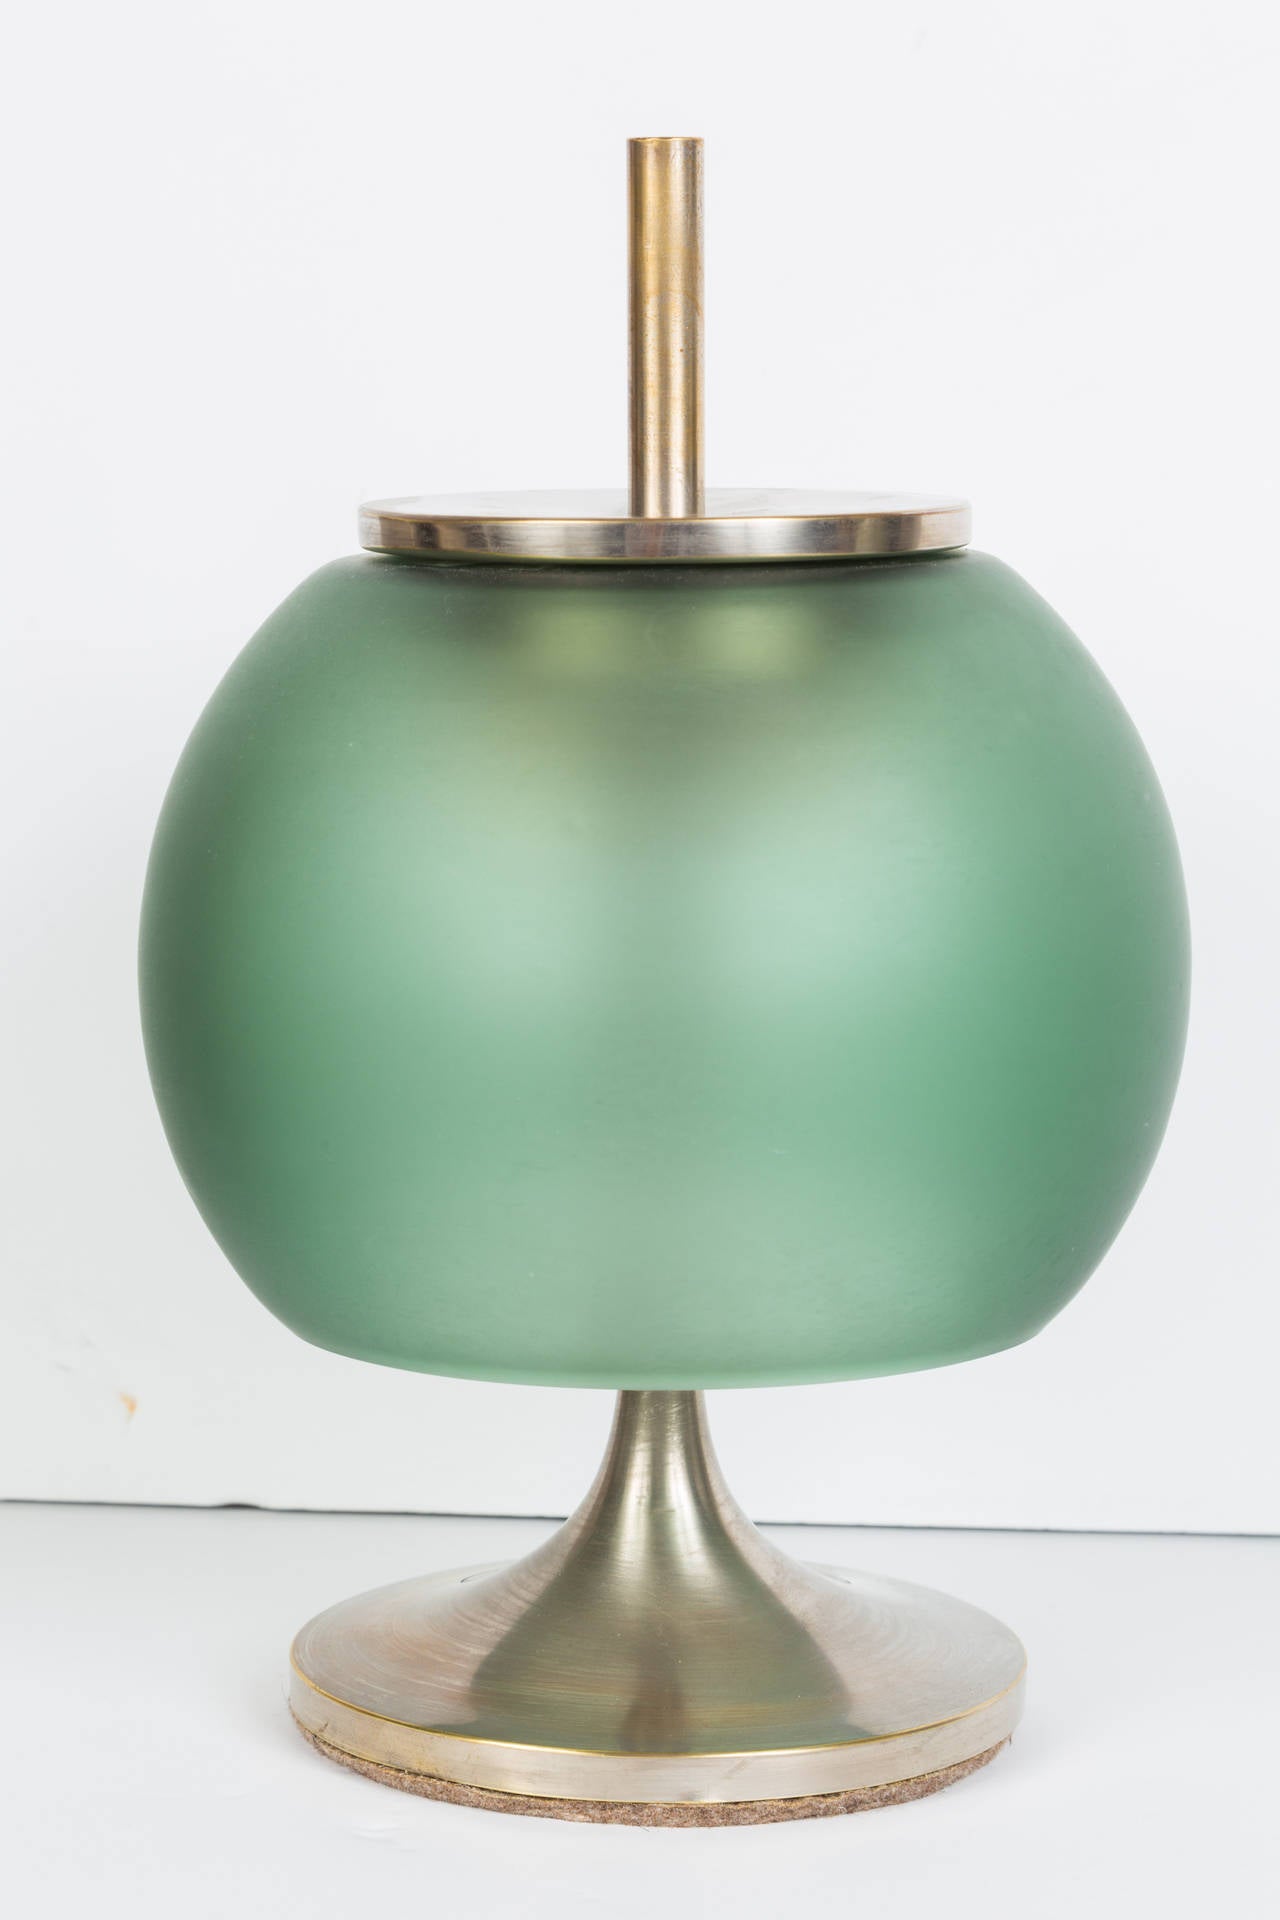 1960s Emma Gismondi Schweinberger 'Chi' Table Lamps for Artemide. These supremely minimal and elegant table lamps are executed in nickel plated metal and handblown green opaline glass. 

Price is per item.